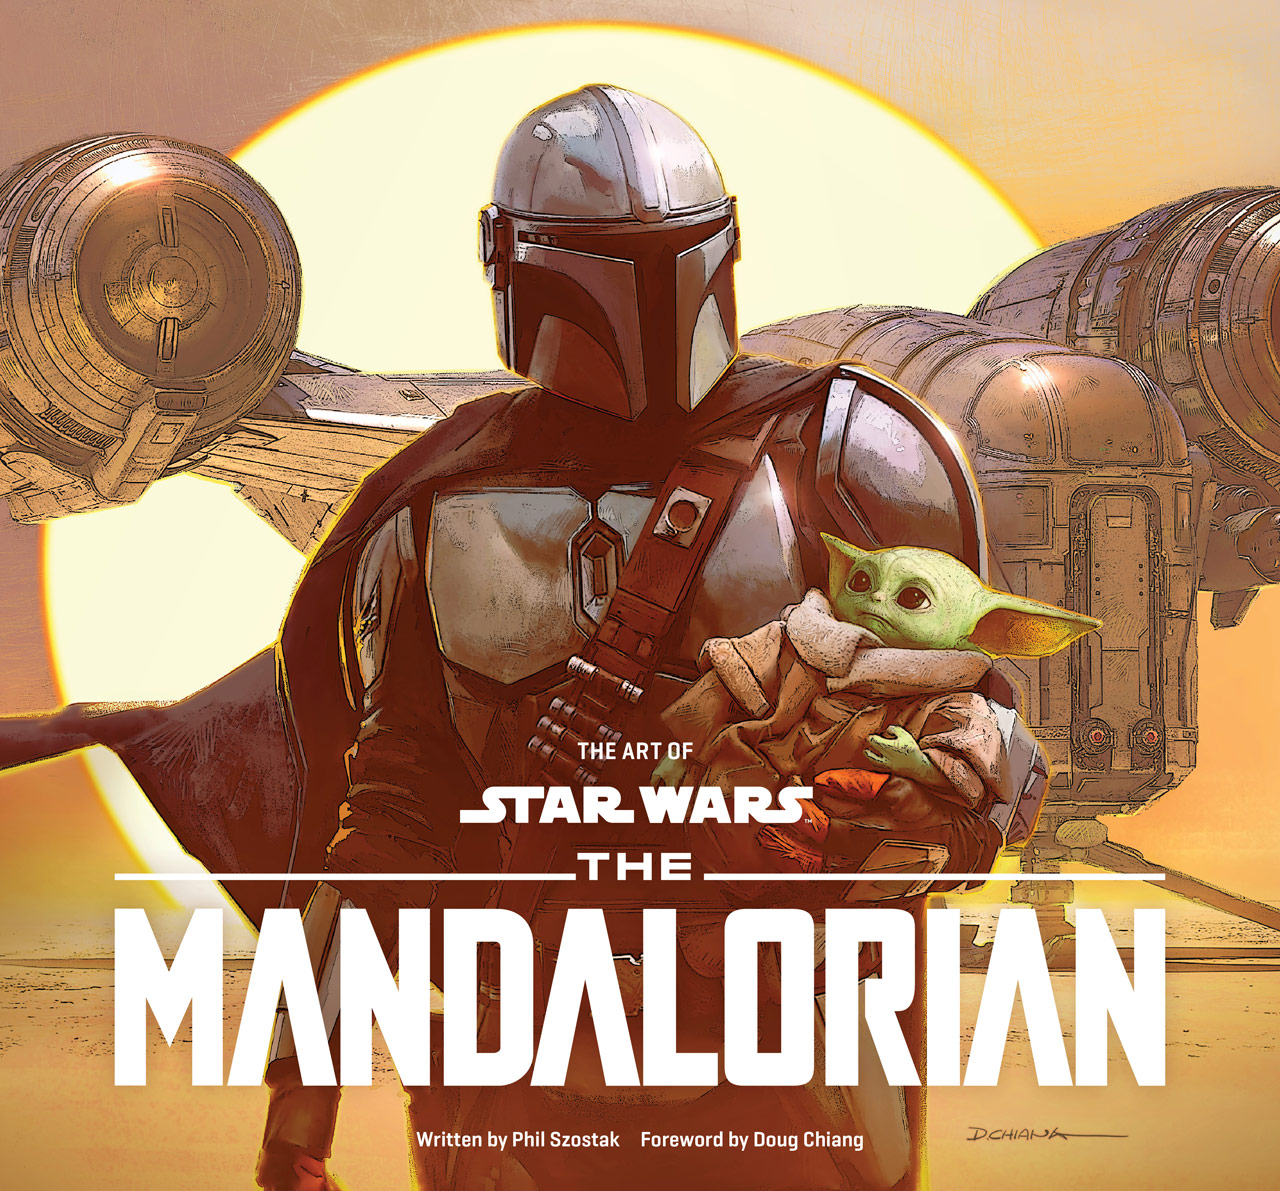 This is the way... New ‘The Mandalorian’ books, comic books and more coming soon